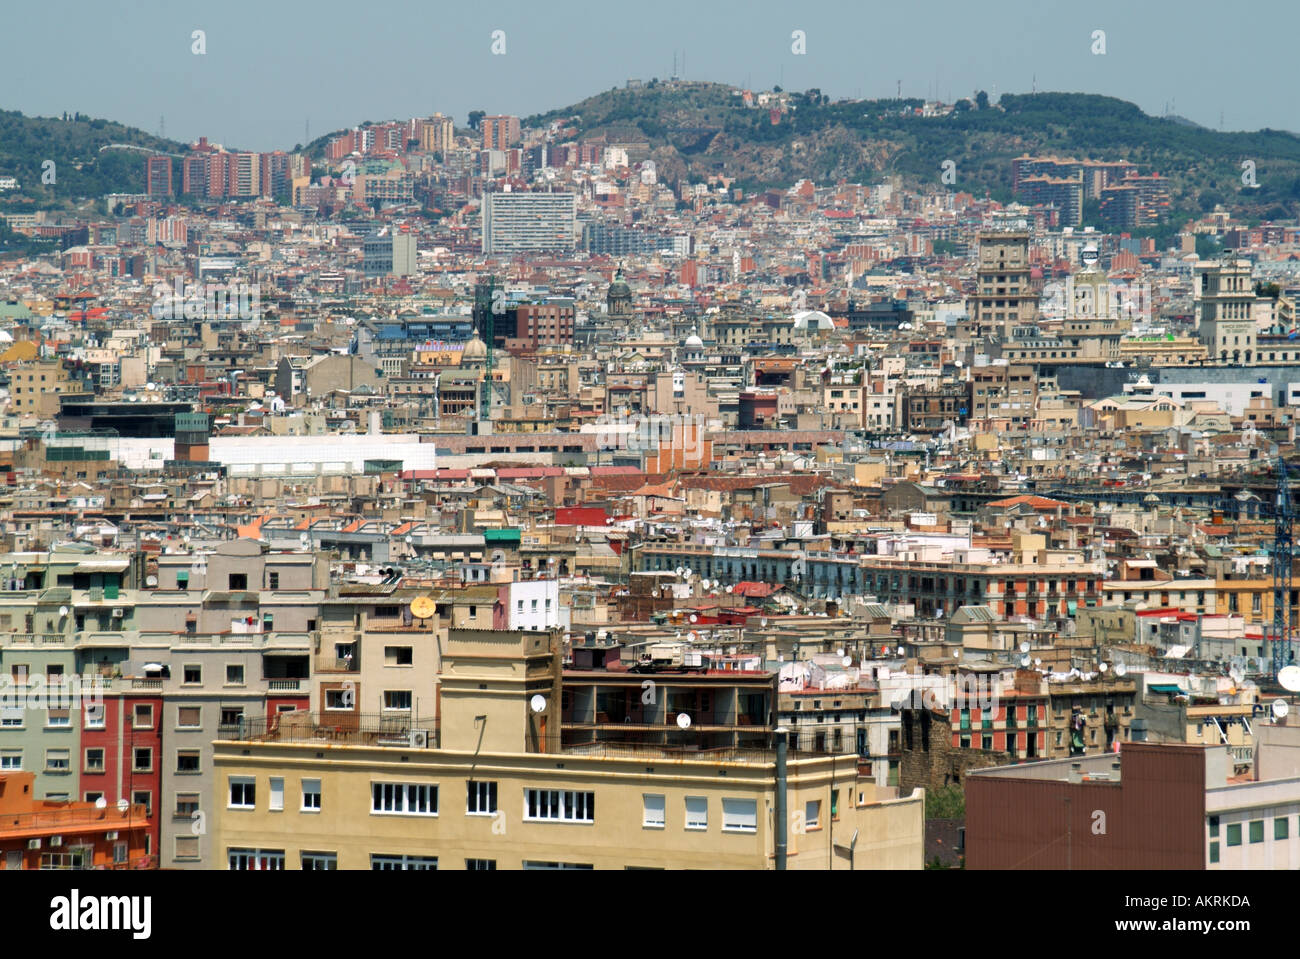 View of buildings & skyline in crowded densely populated Barcelona City a Spanish cityscape & urban landscape in capital of Catalonia Spain Europe EU Stock Photo